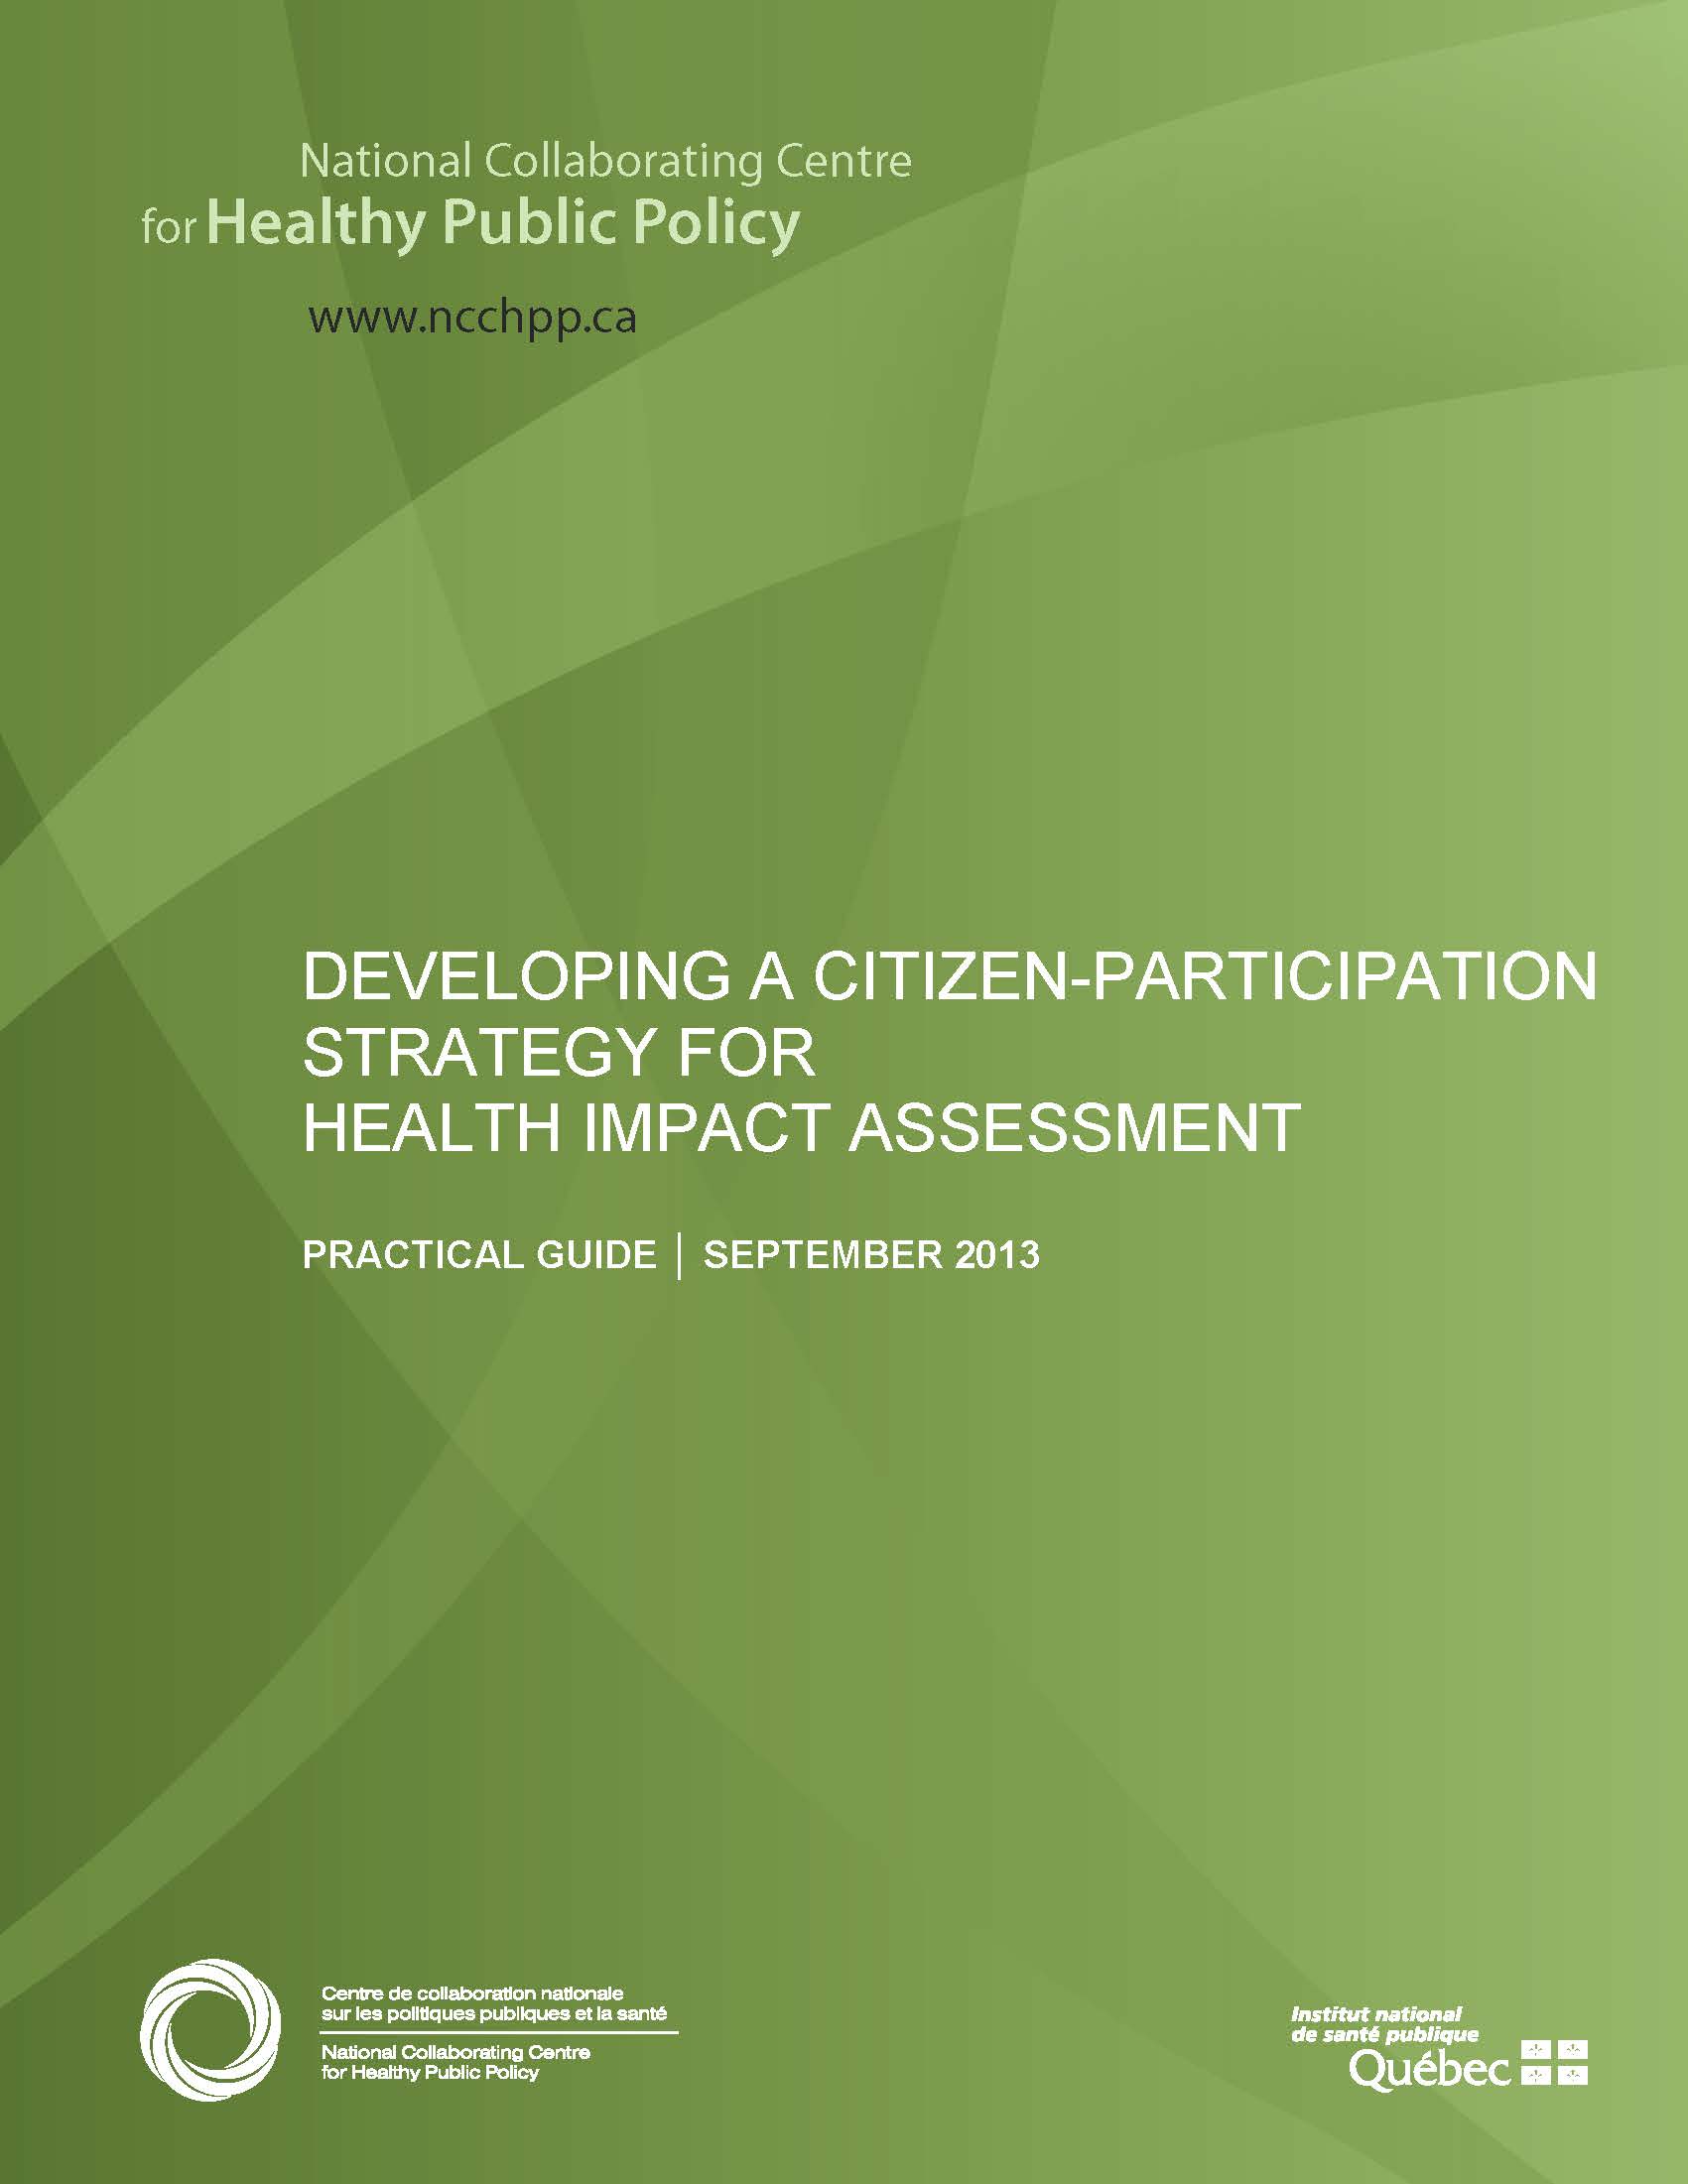 Developing a Citizen-Participation Strategy for Health Impact Assessment: Practical Guide